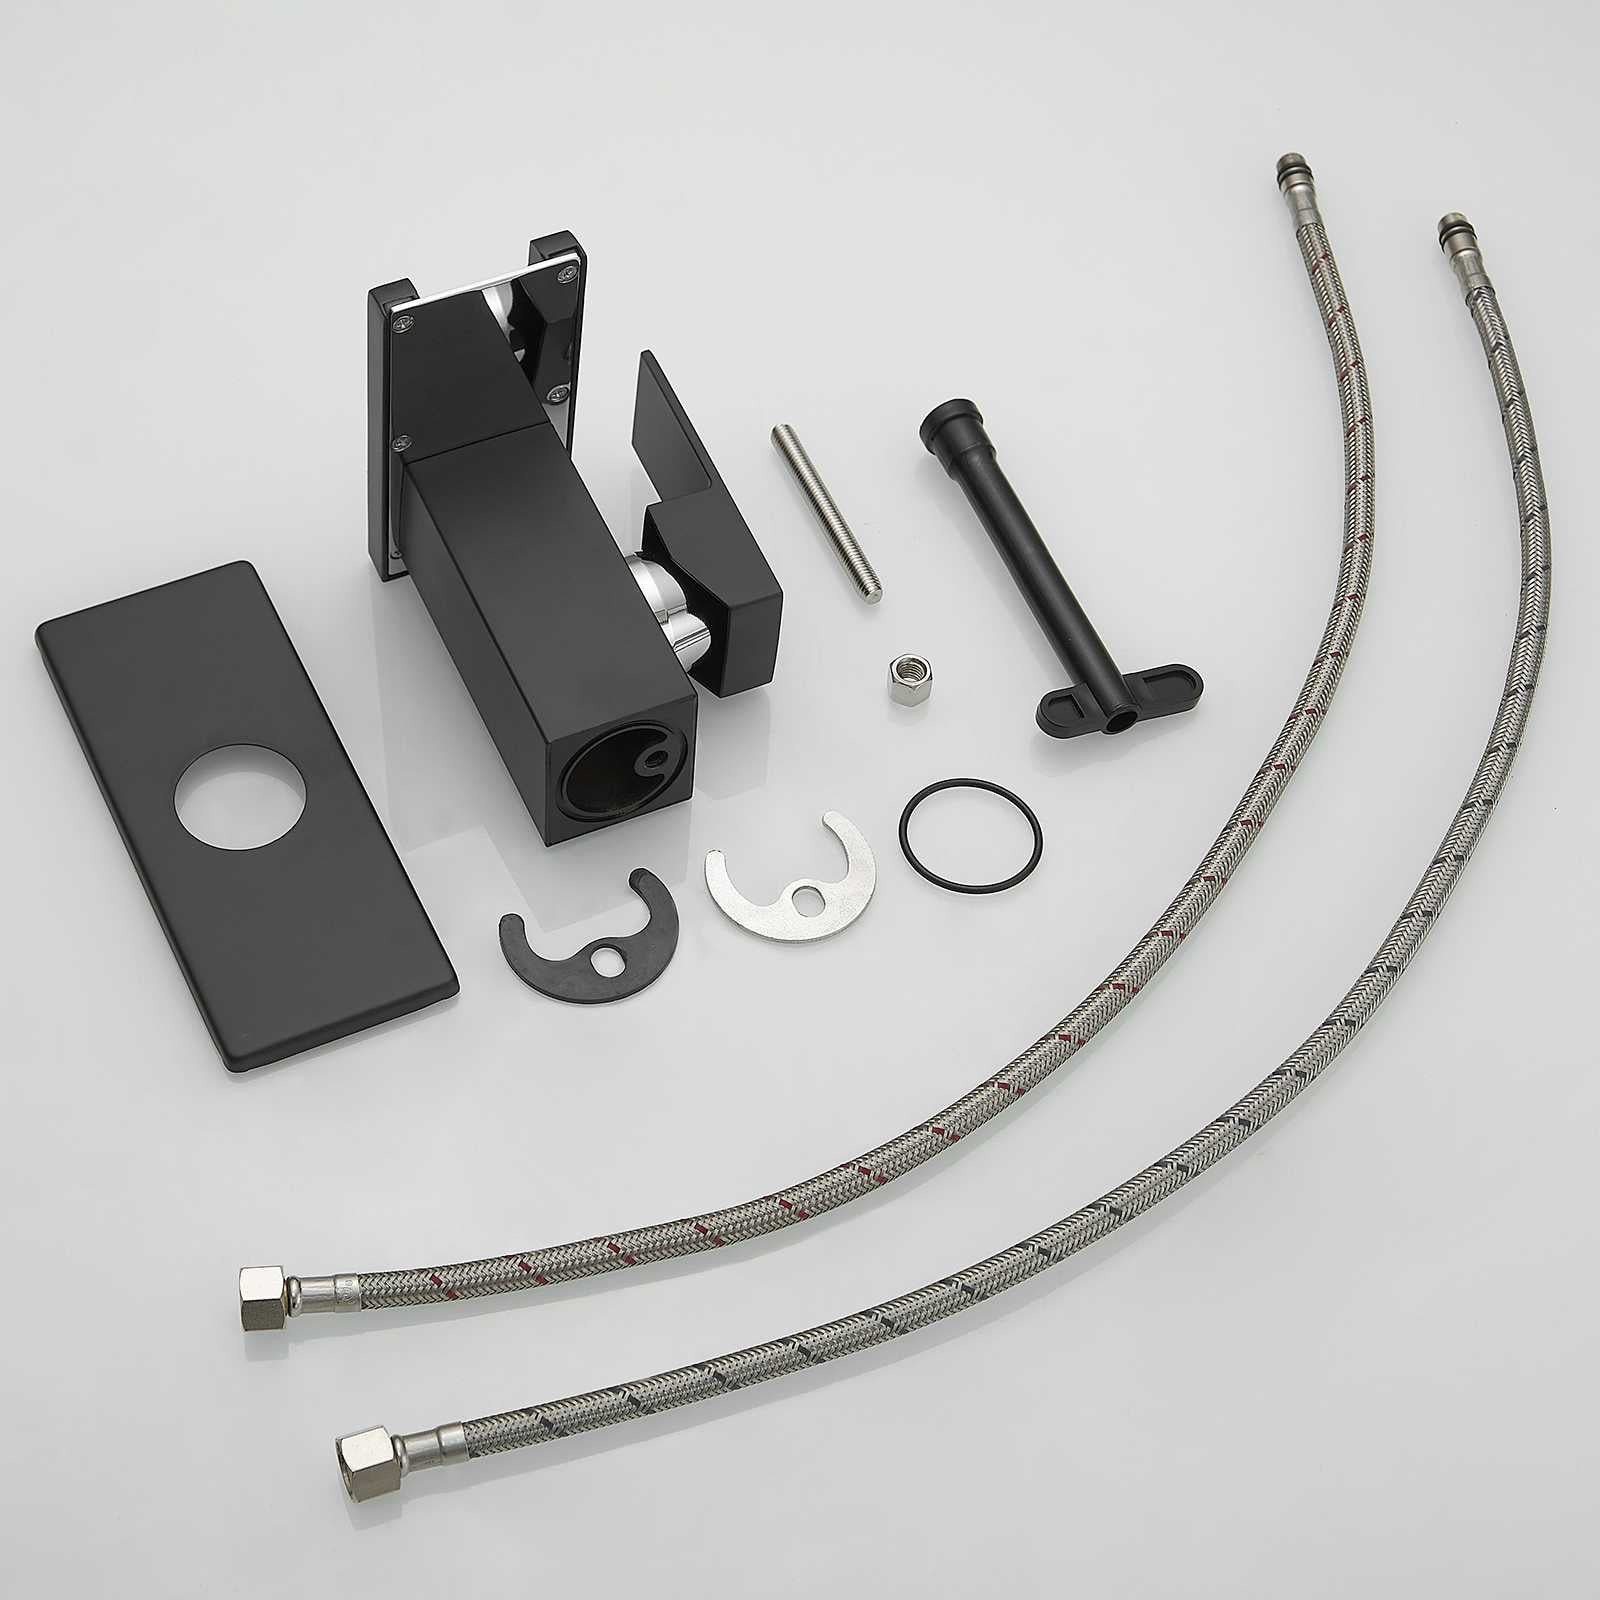  Black waterfall spout disassembled